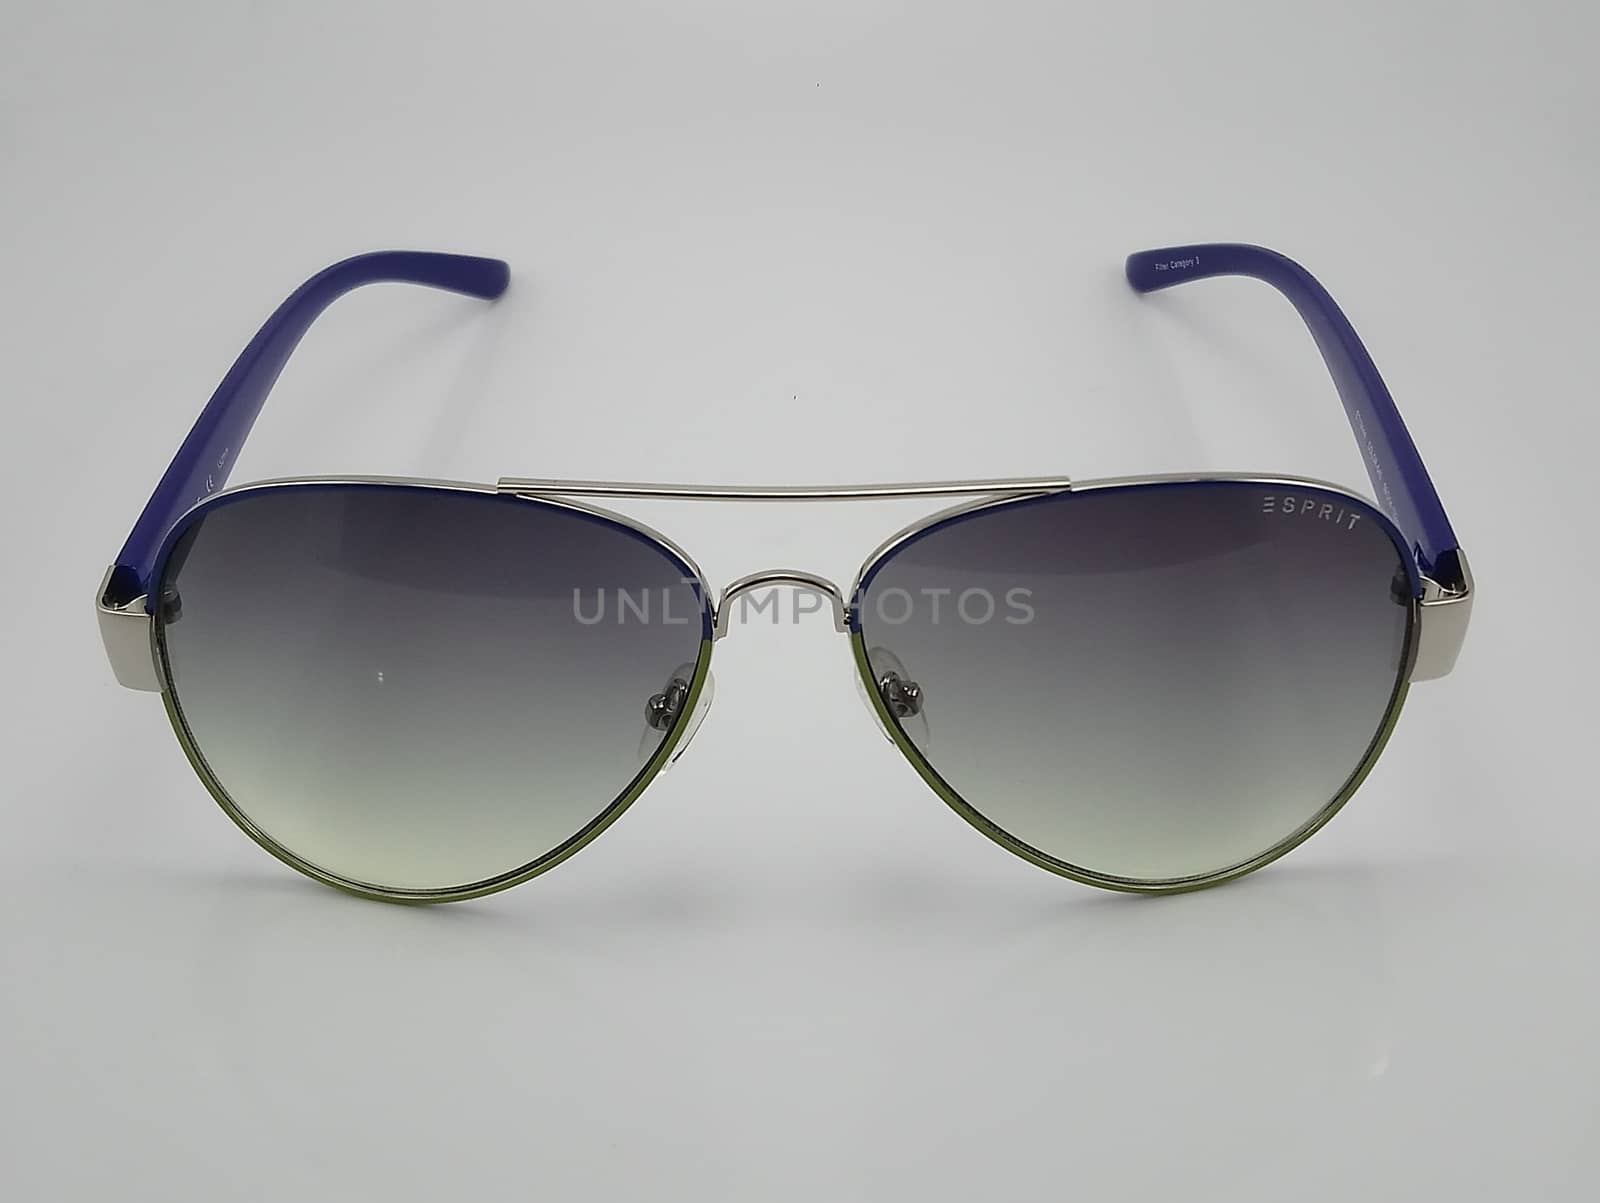 QUEZON CITY, PH - JULY 28 - Esprit sunglass shades on July 28, 2020 in Quezon City, Philippines.